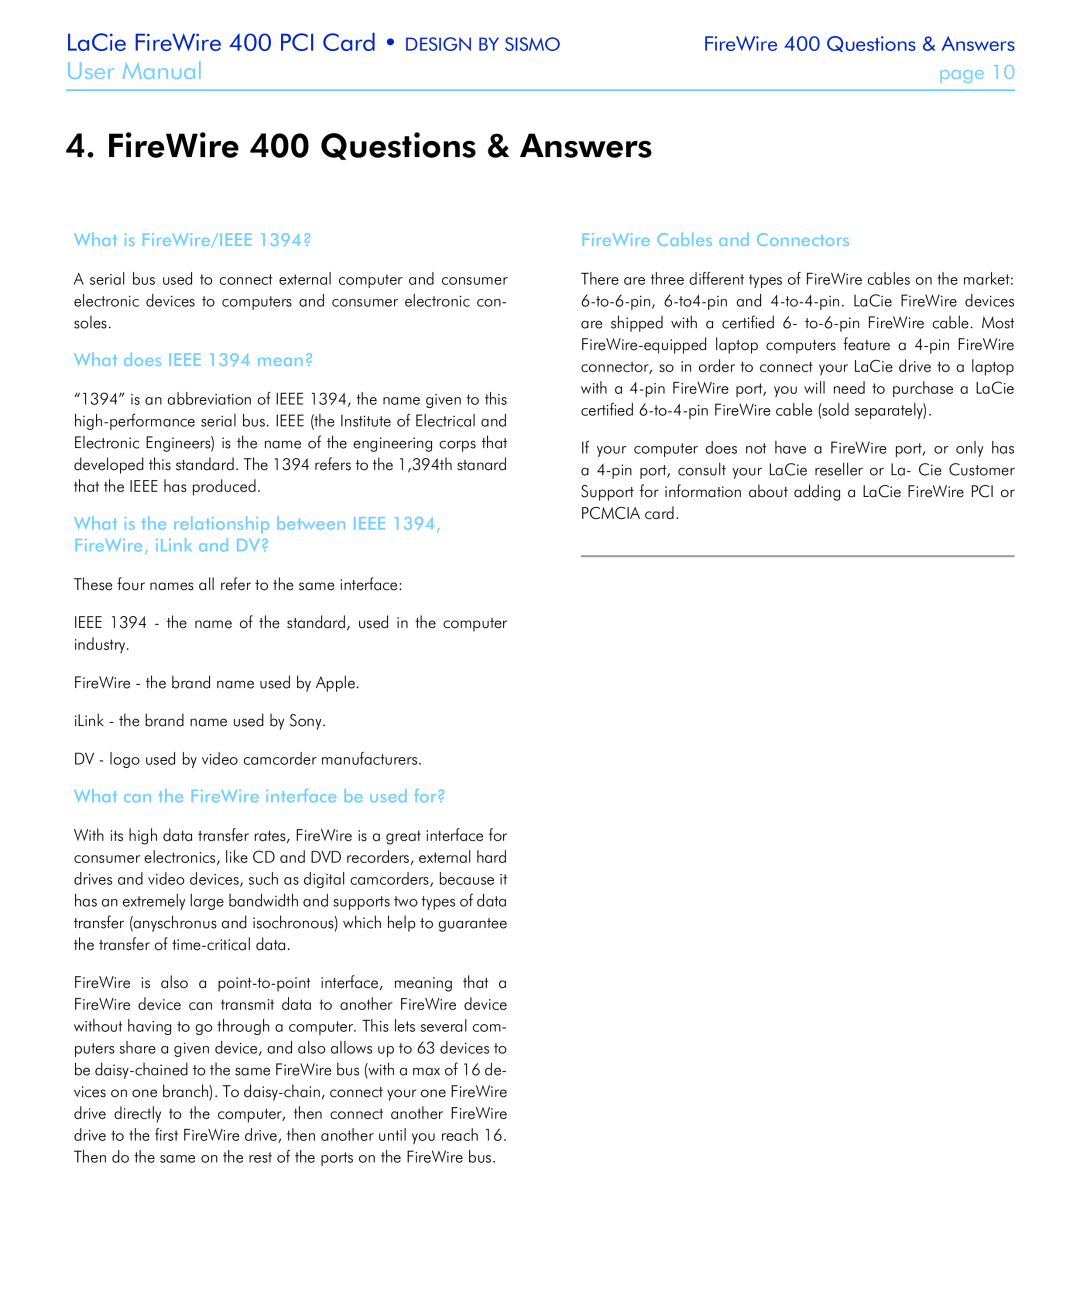 LaCie FireWire 400 Questions & Answers, What is FireWire/IEEE 1394?, What does IEEE 1394 mean?, User Manual, page 